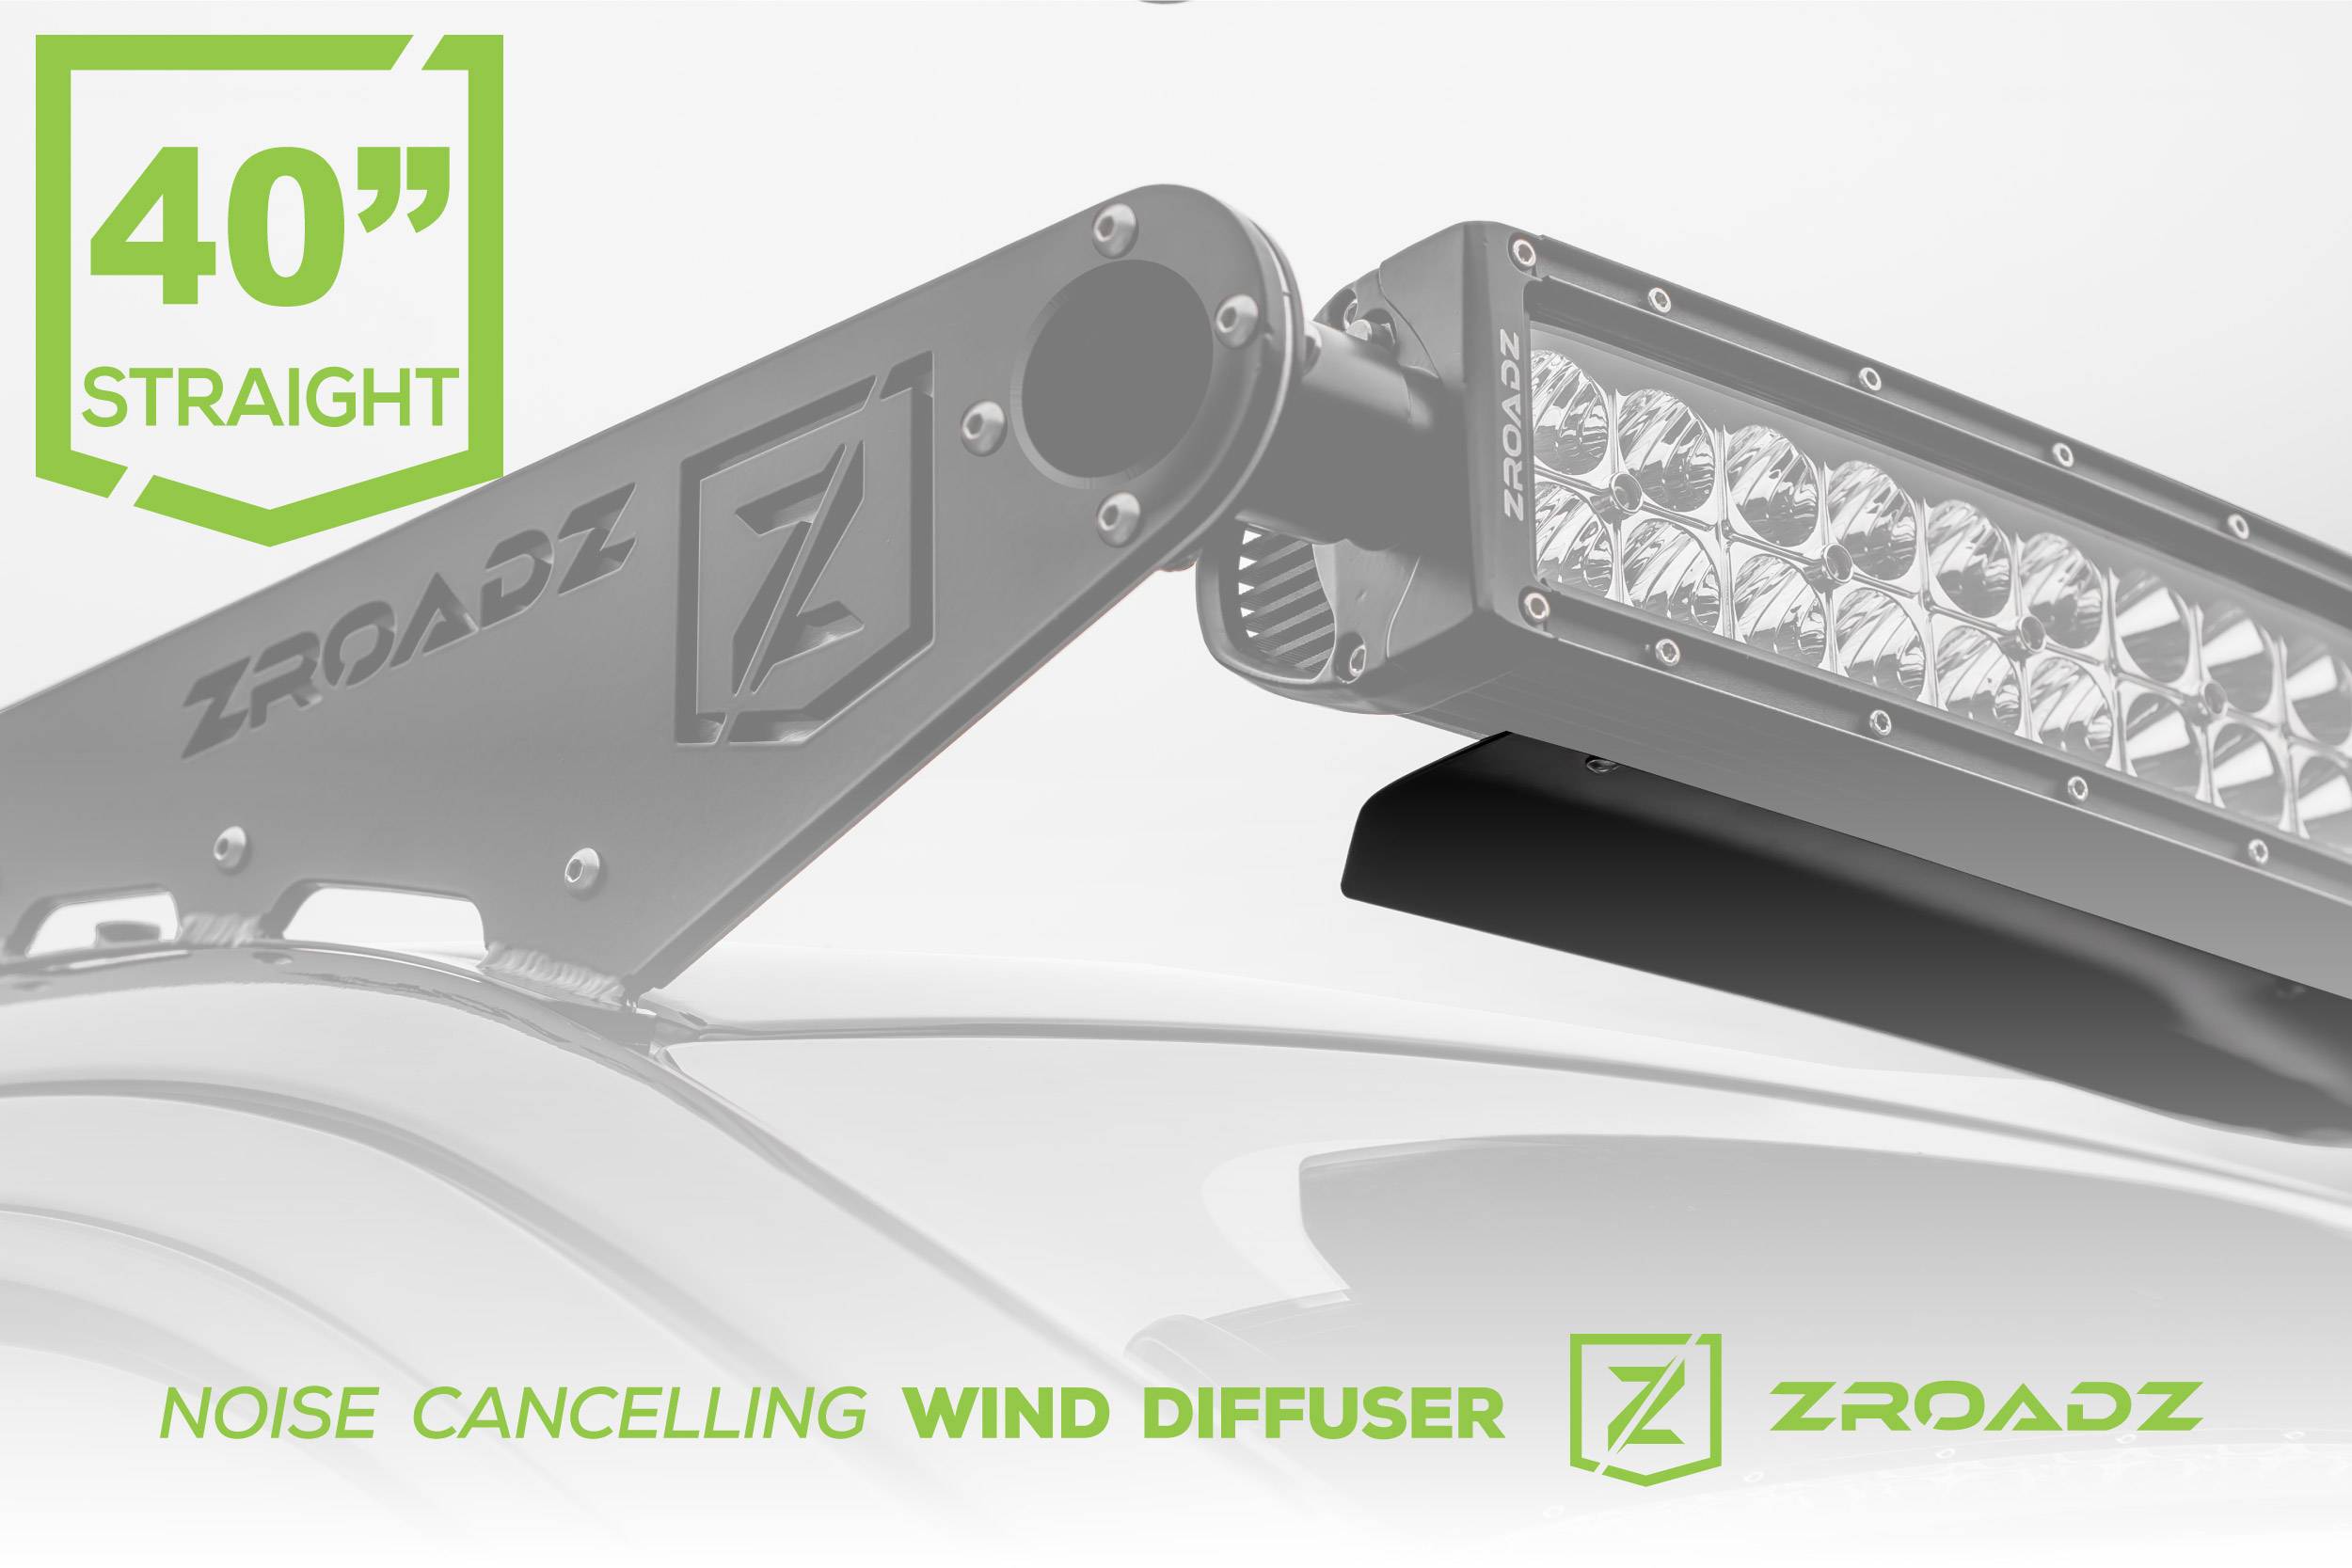 ZROADZ OFF ROAD PRODUCTS - Noise Cancelling Wind Diffuser for 40 Inch Straight LED Light Bar - Part # Z330040S